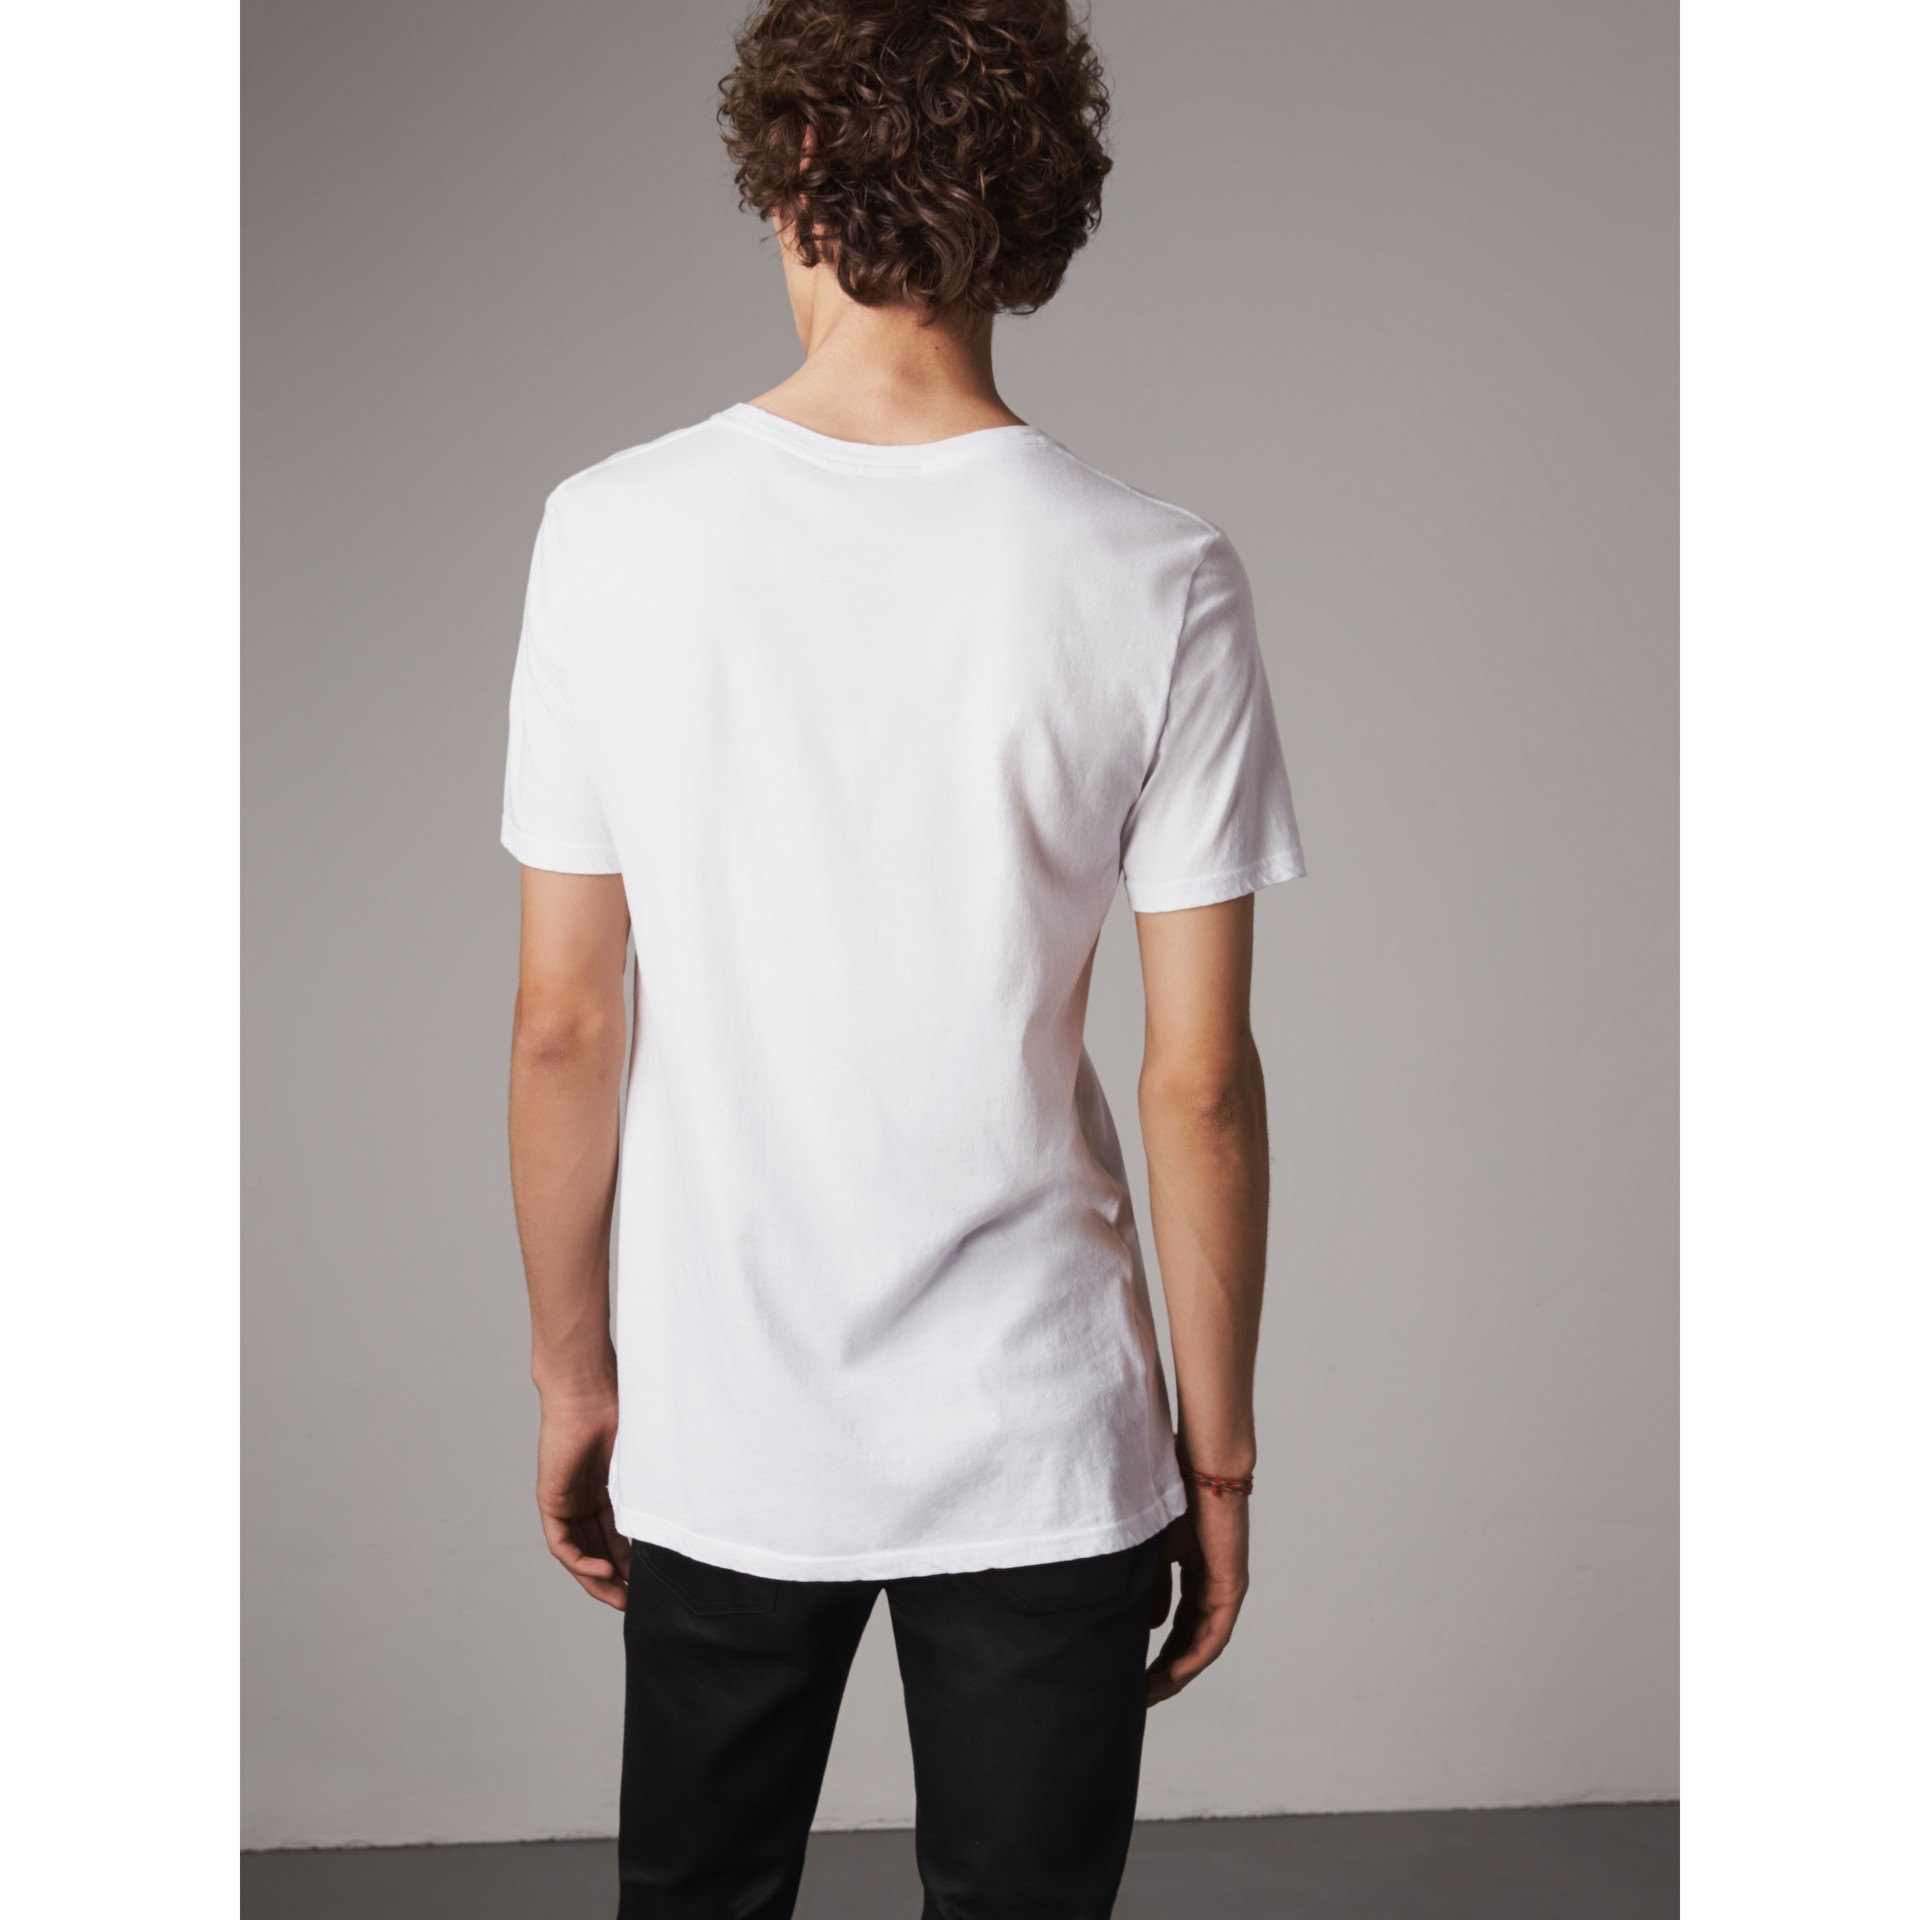 Doodle Print Cotton T-Shirt in White - Men | Burberry United States